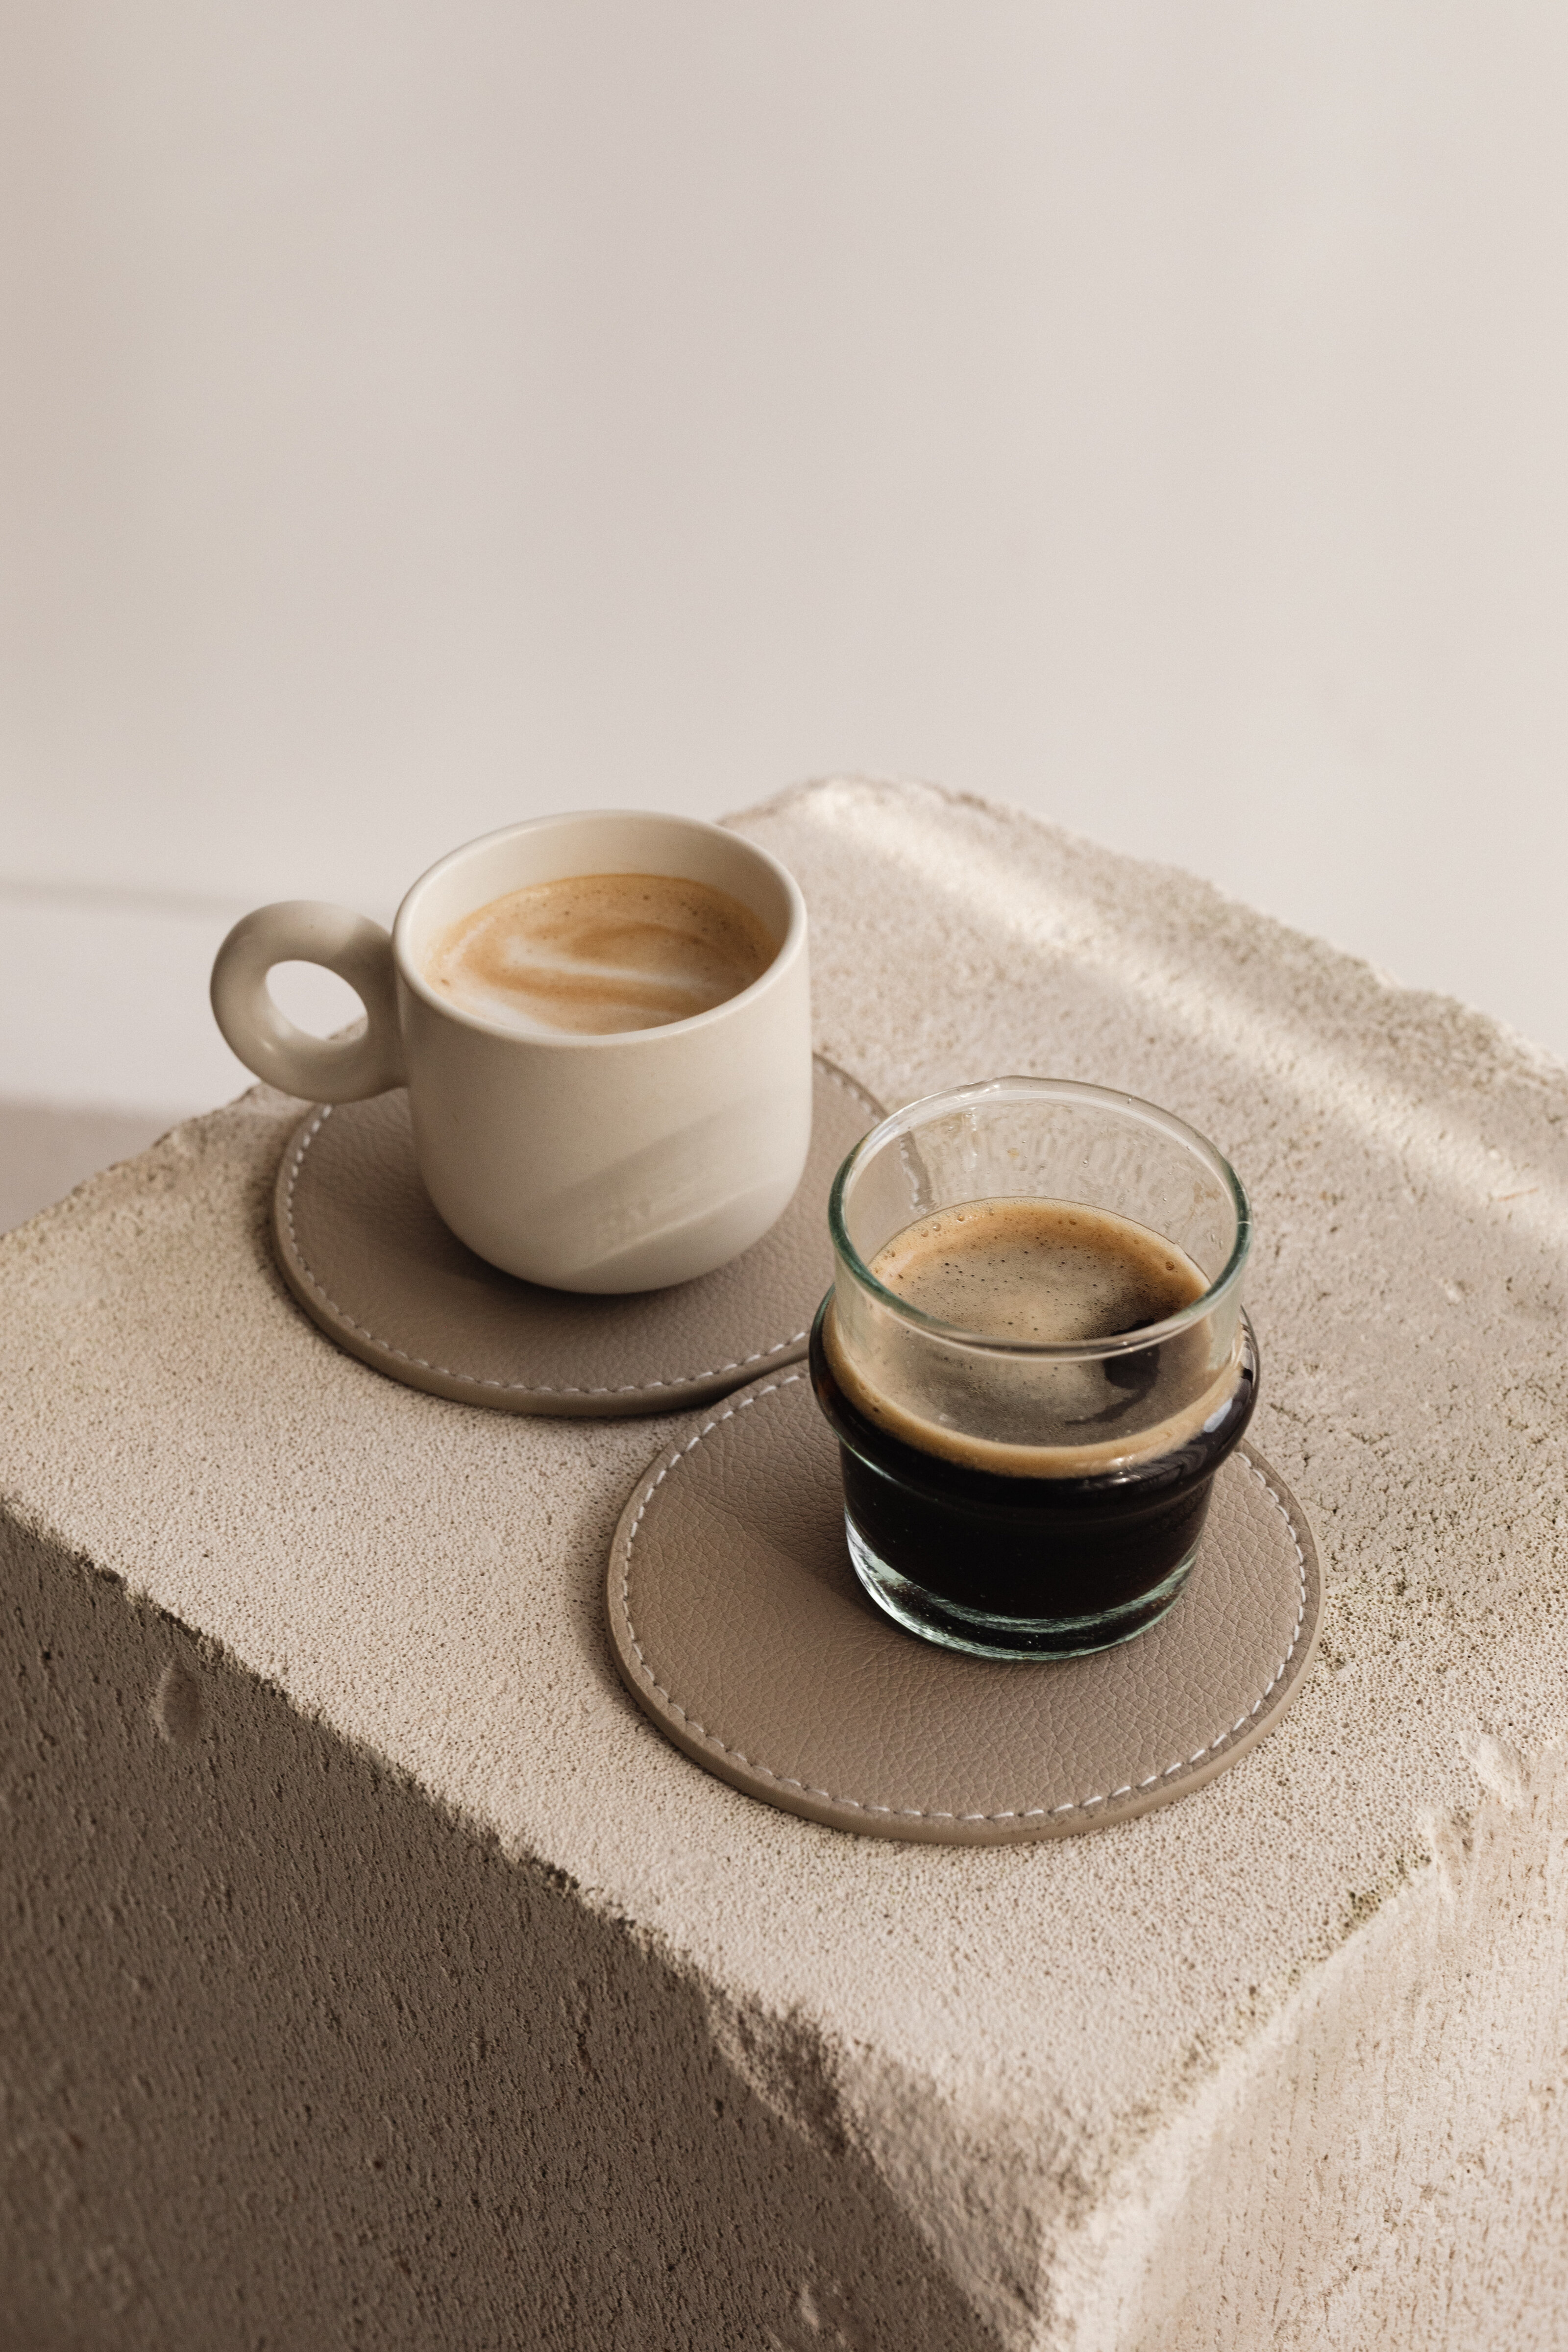 kaboompics_small-cups-of-coffee-neutral-aesthetics-30421 (1)